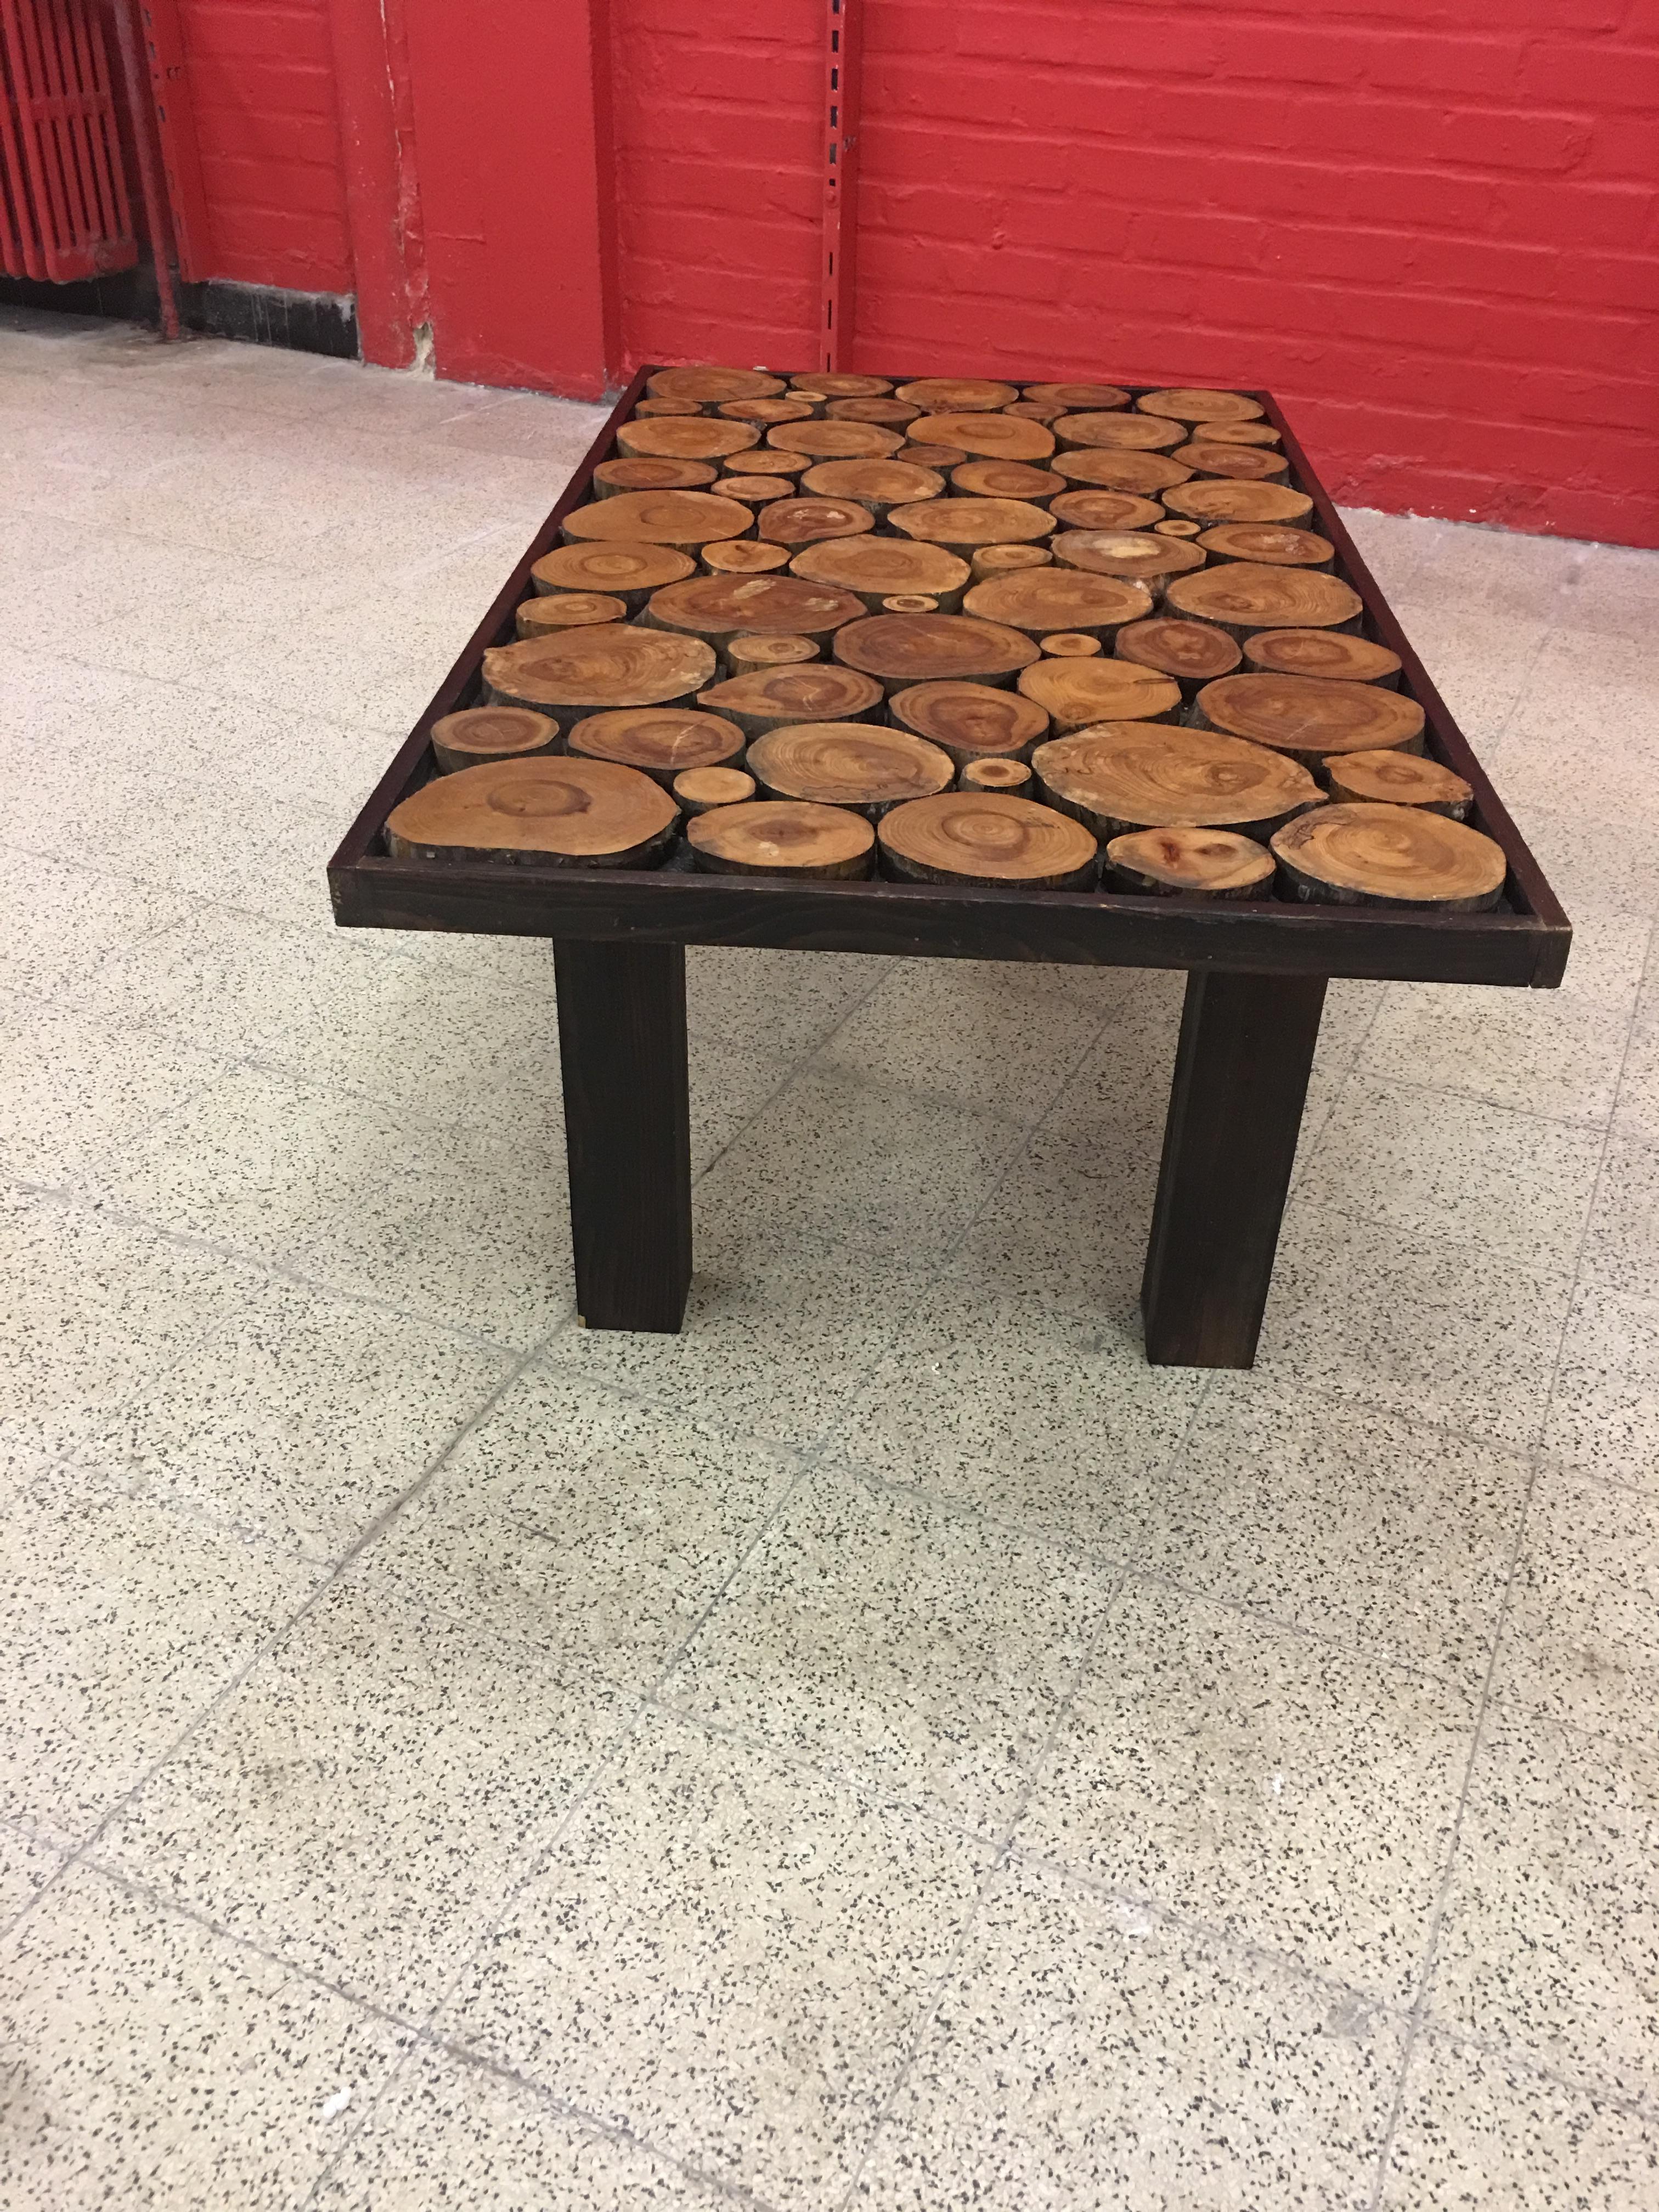 Blackened Wooden Coffee Table, Tray Made Up of Cut Branches, circa 1960-1970 For Sale 4